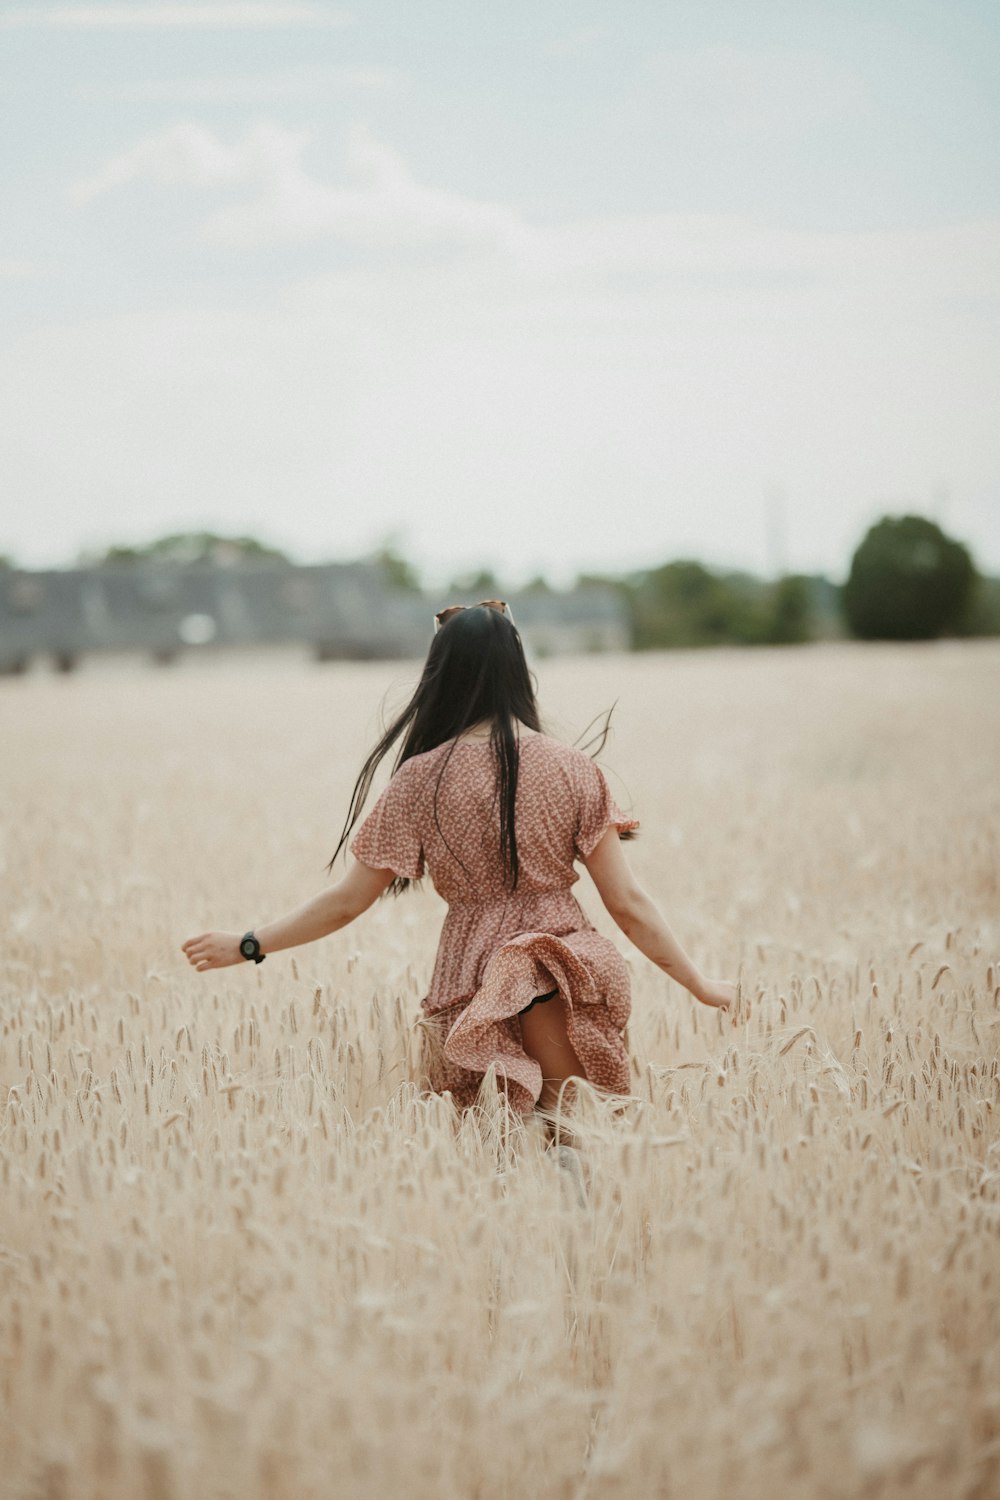 a young girl running through a field of wheat